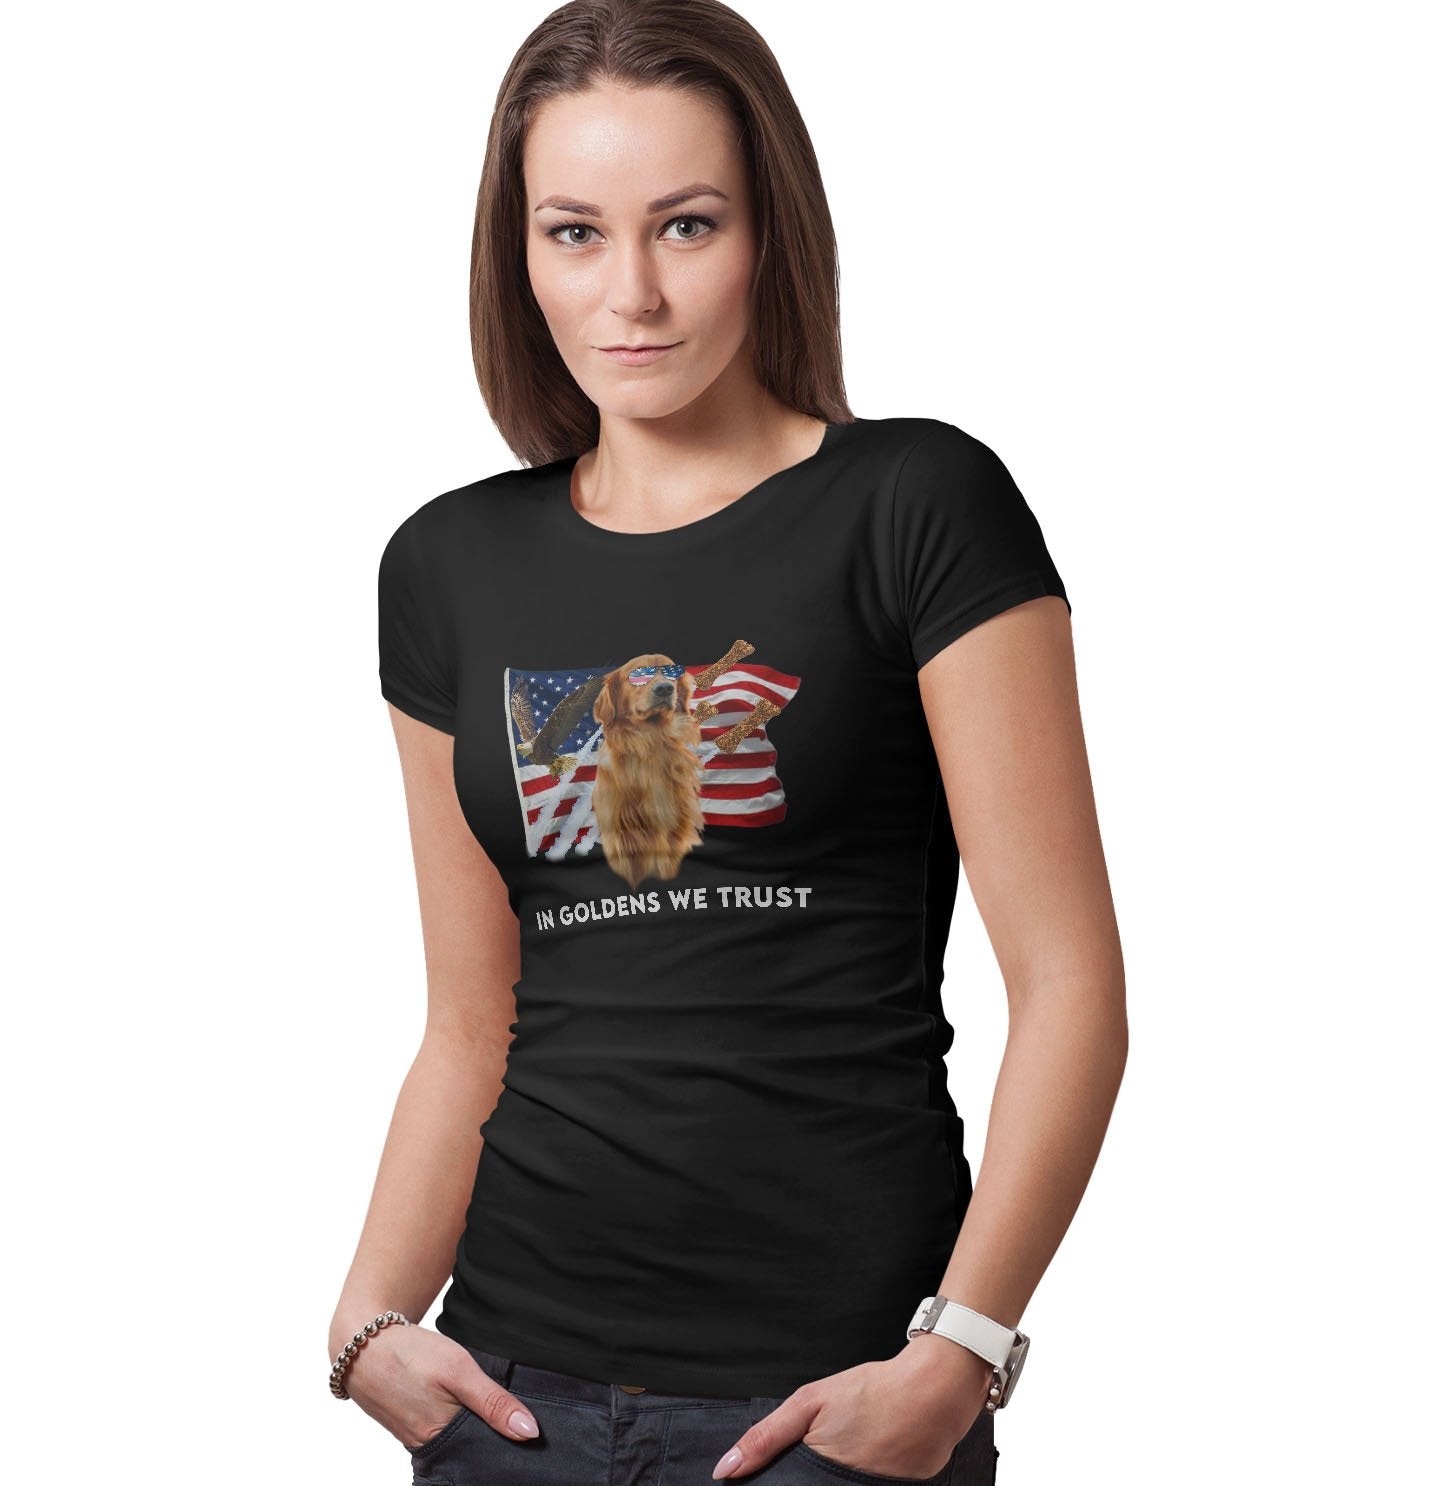 In Golden we Trust - Women's Fitted T-Shirt